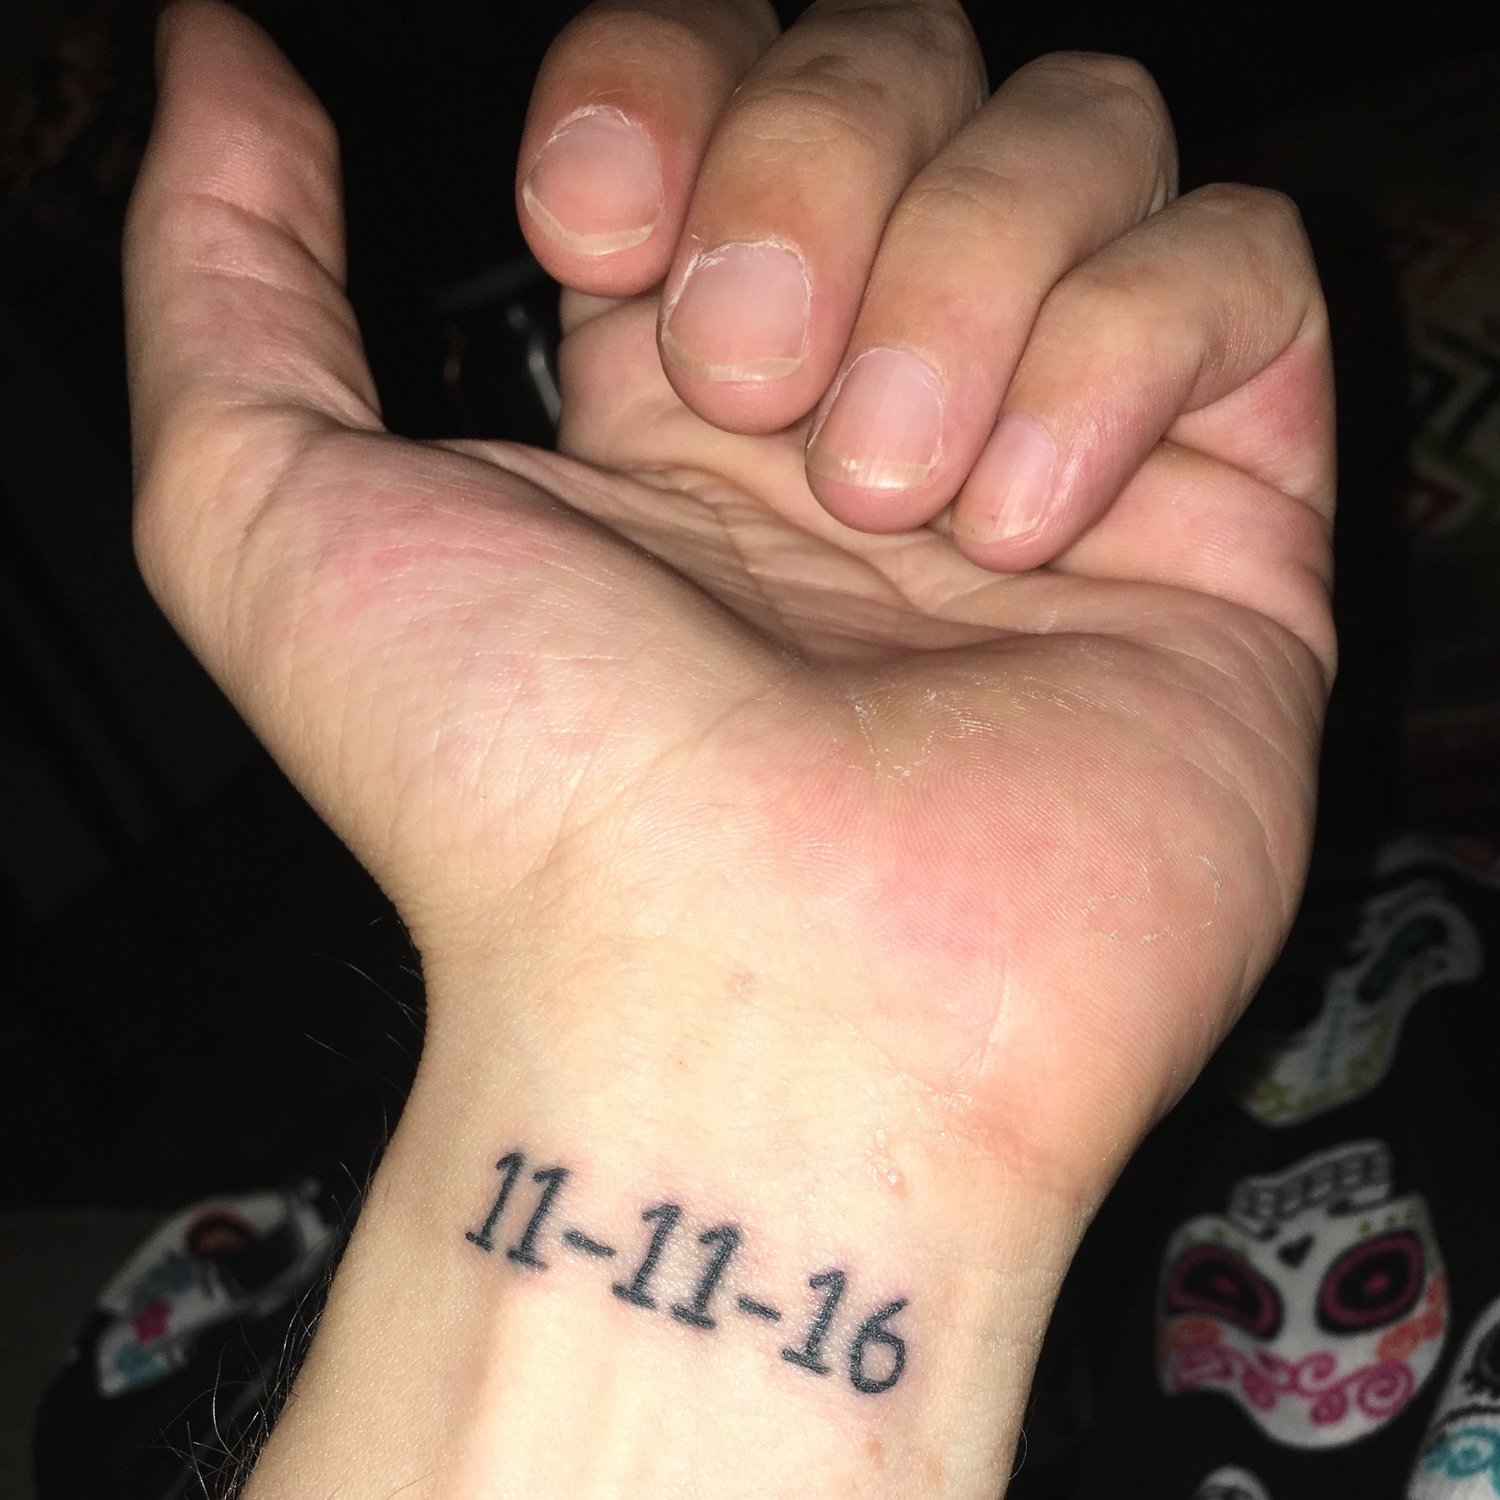 Tattoo that I got as a daily reminder to be grateful.